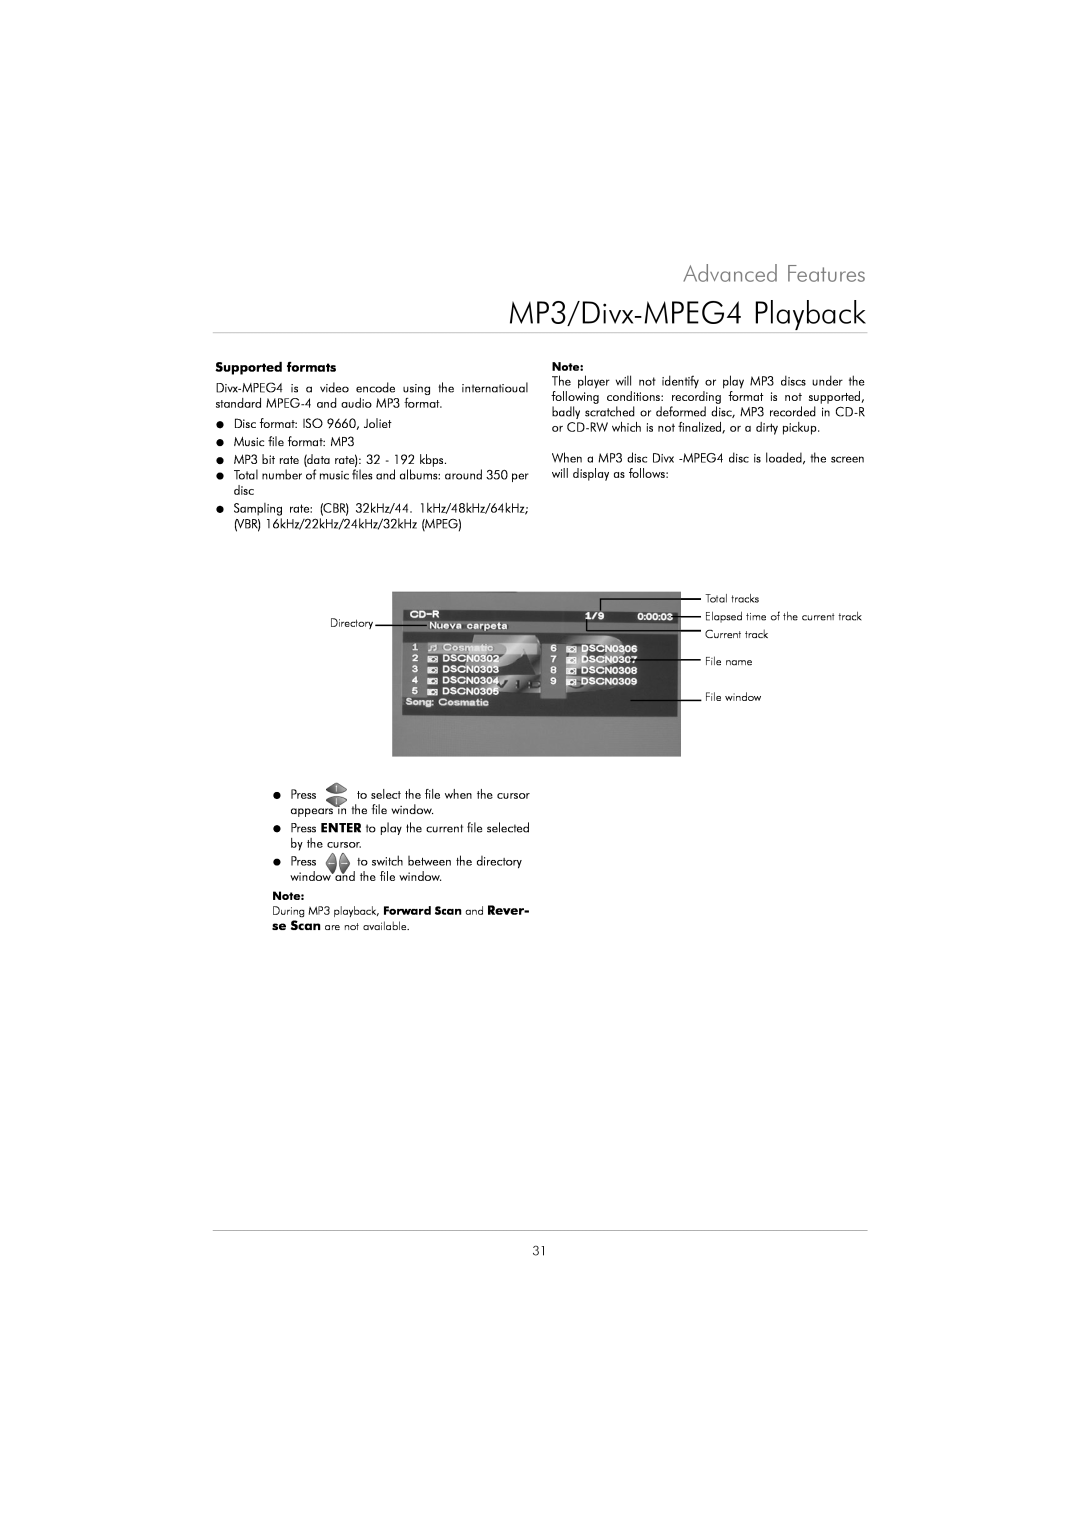 Kodak DVD 40 user manual MP3/Divx-MPEG4 Playback, Supported formats, Advanced Features 